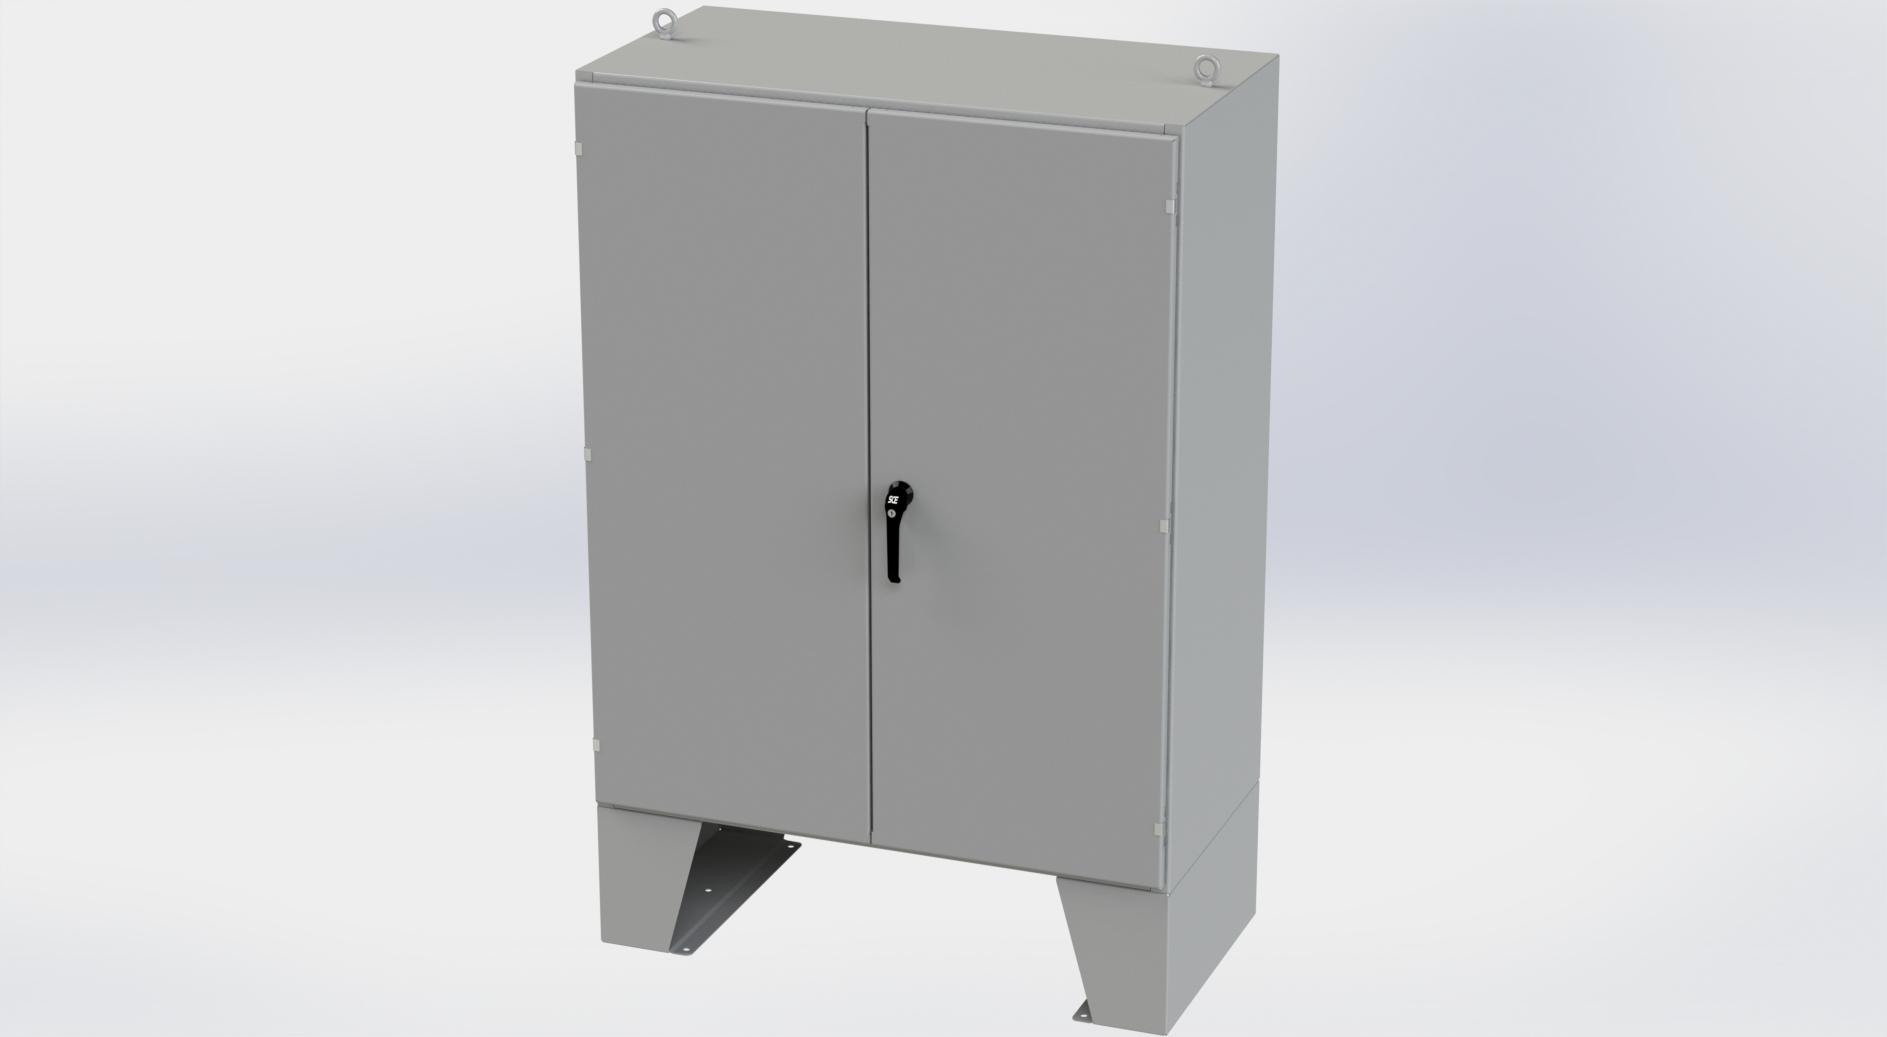 Saginaw Control SCE-604824LP 2DR LP Enclosure, Height:60.00", Width:48.00", Depth:24.00", ANSI-61 gray powder coating inside and out. Optional sub-panels are powder coated white.